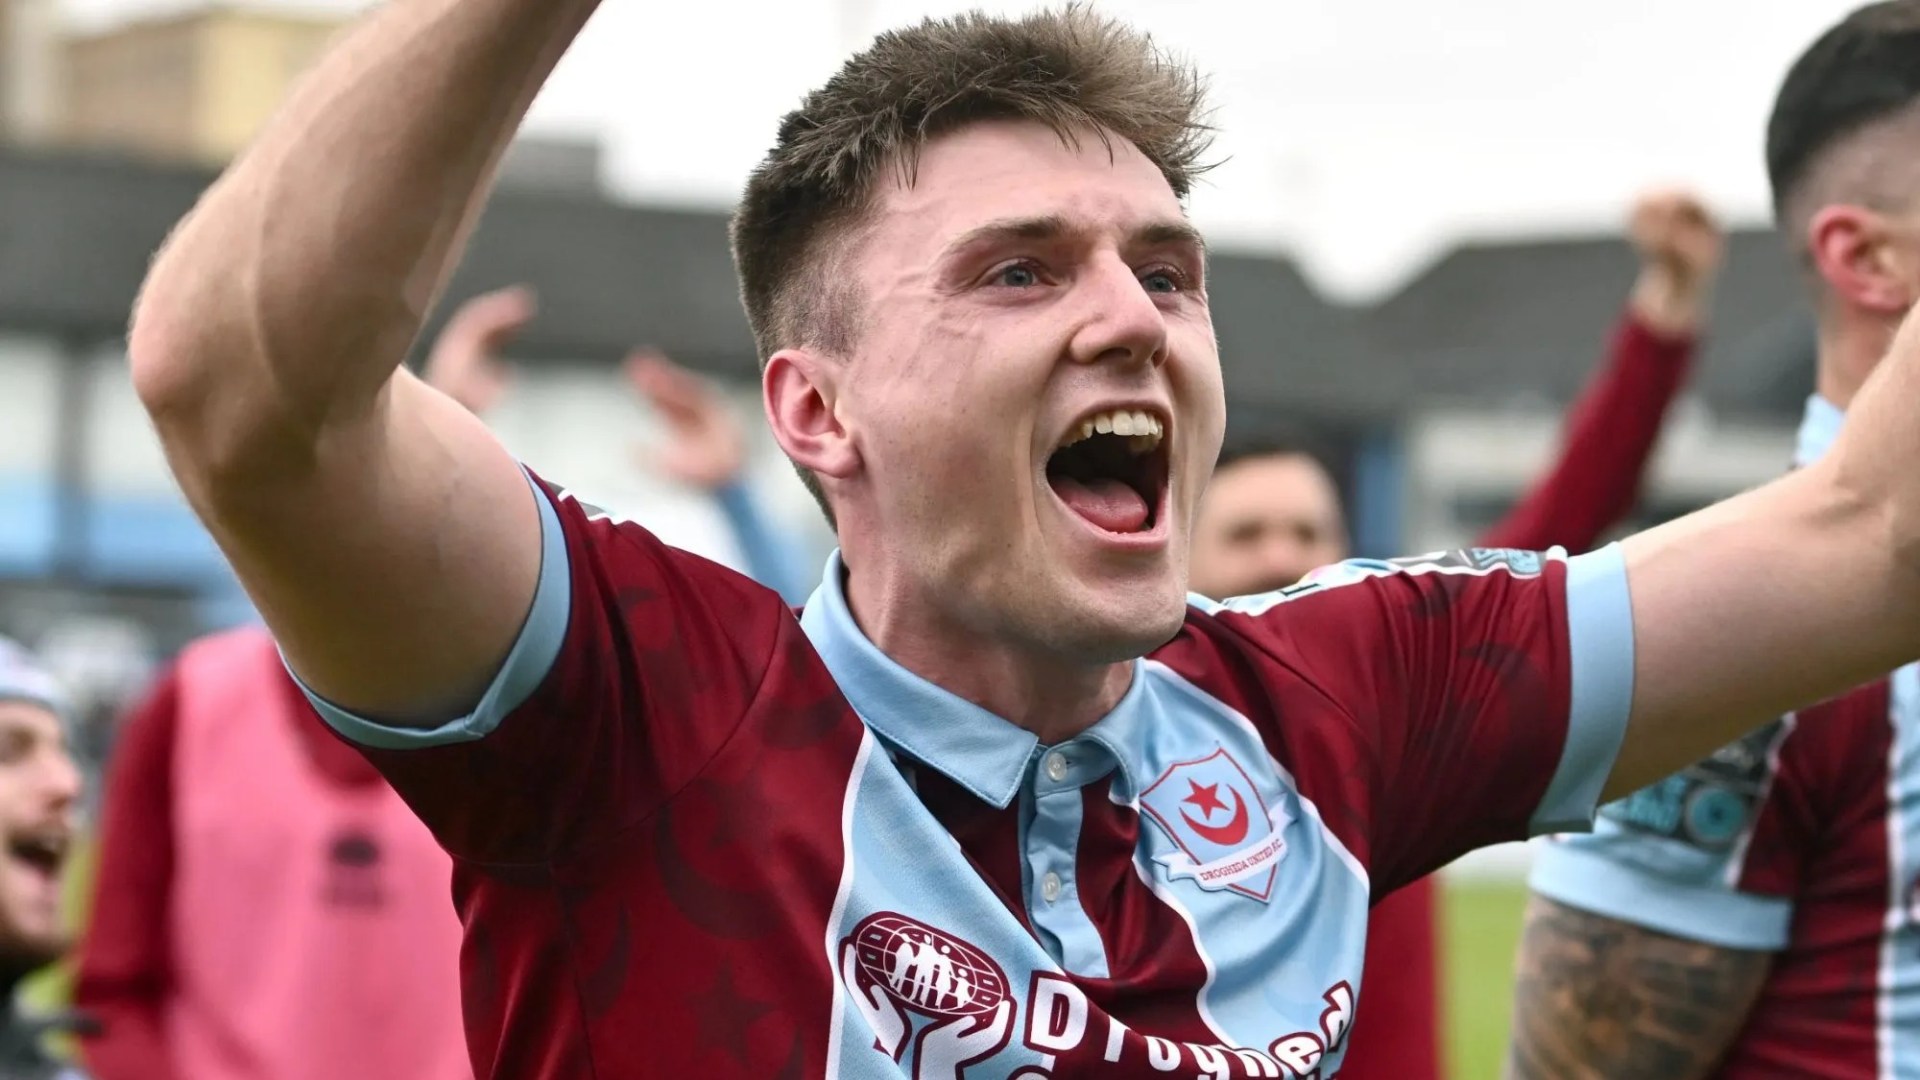 Kevin Doherty ‘cant remember anything madder than that’ as Drogheda snatch dramatic win over Dundalk [Video]